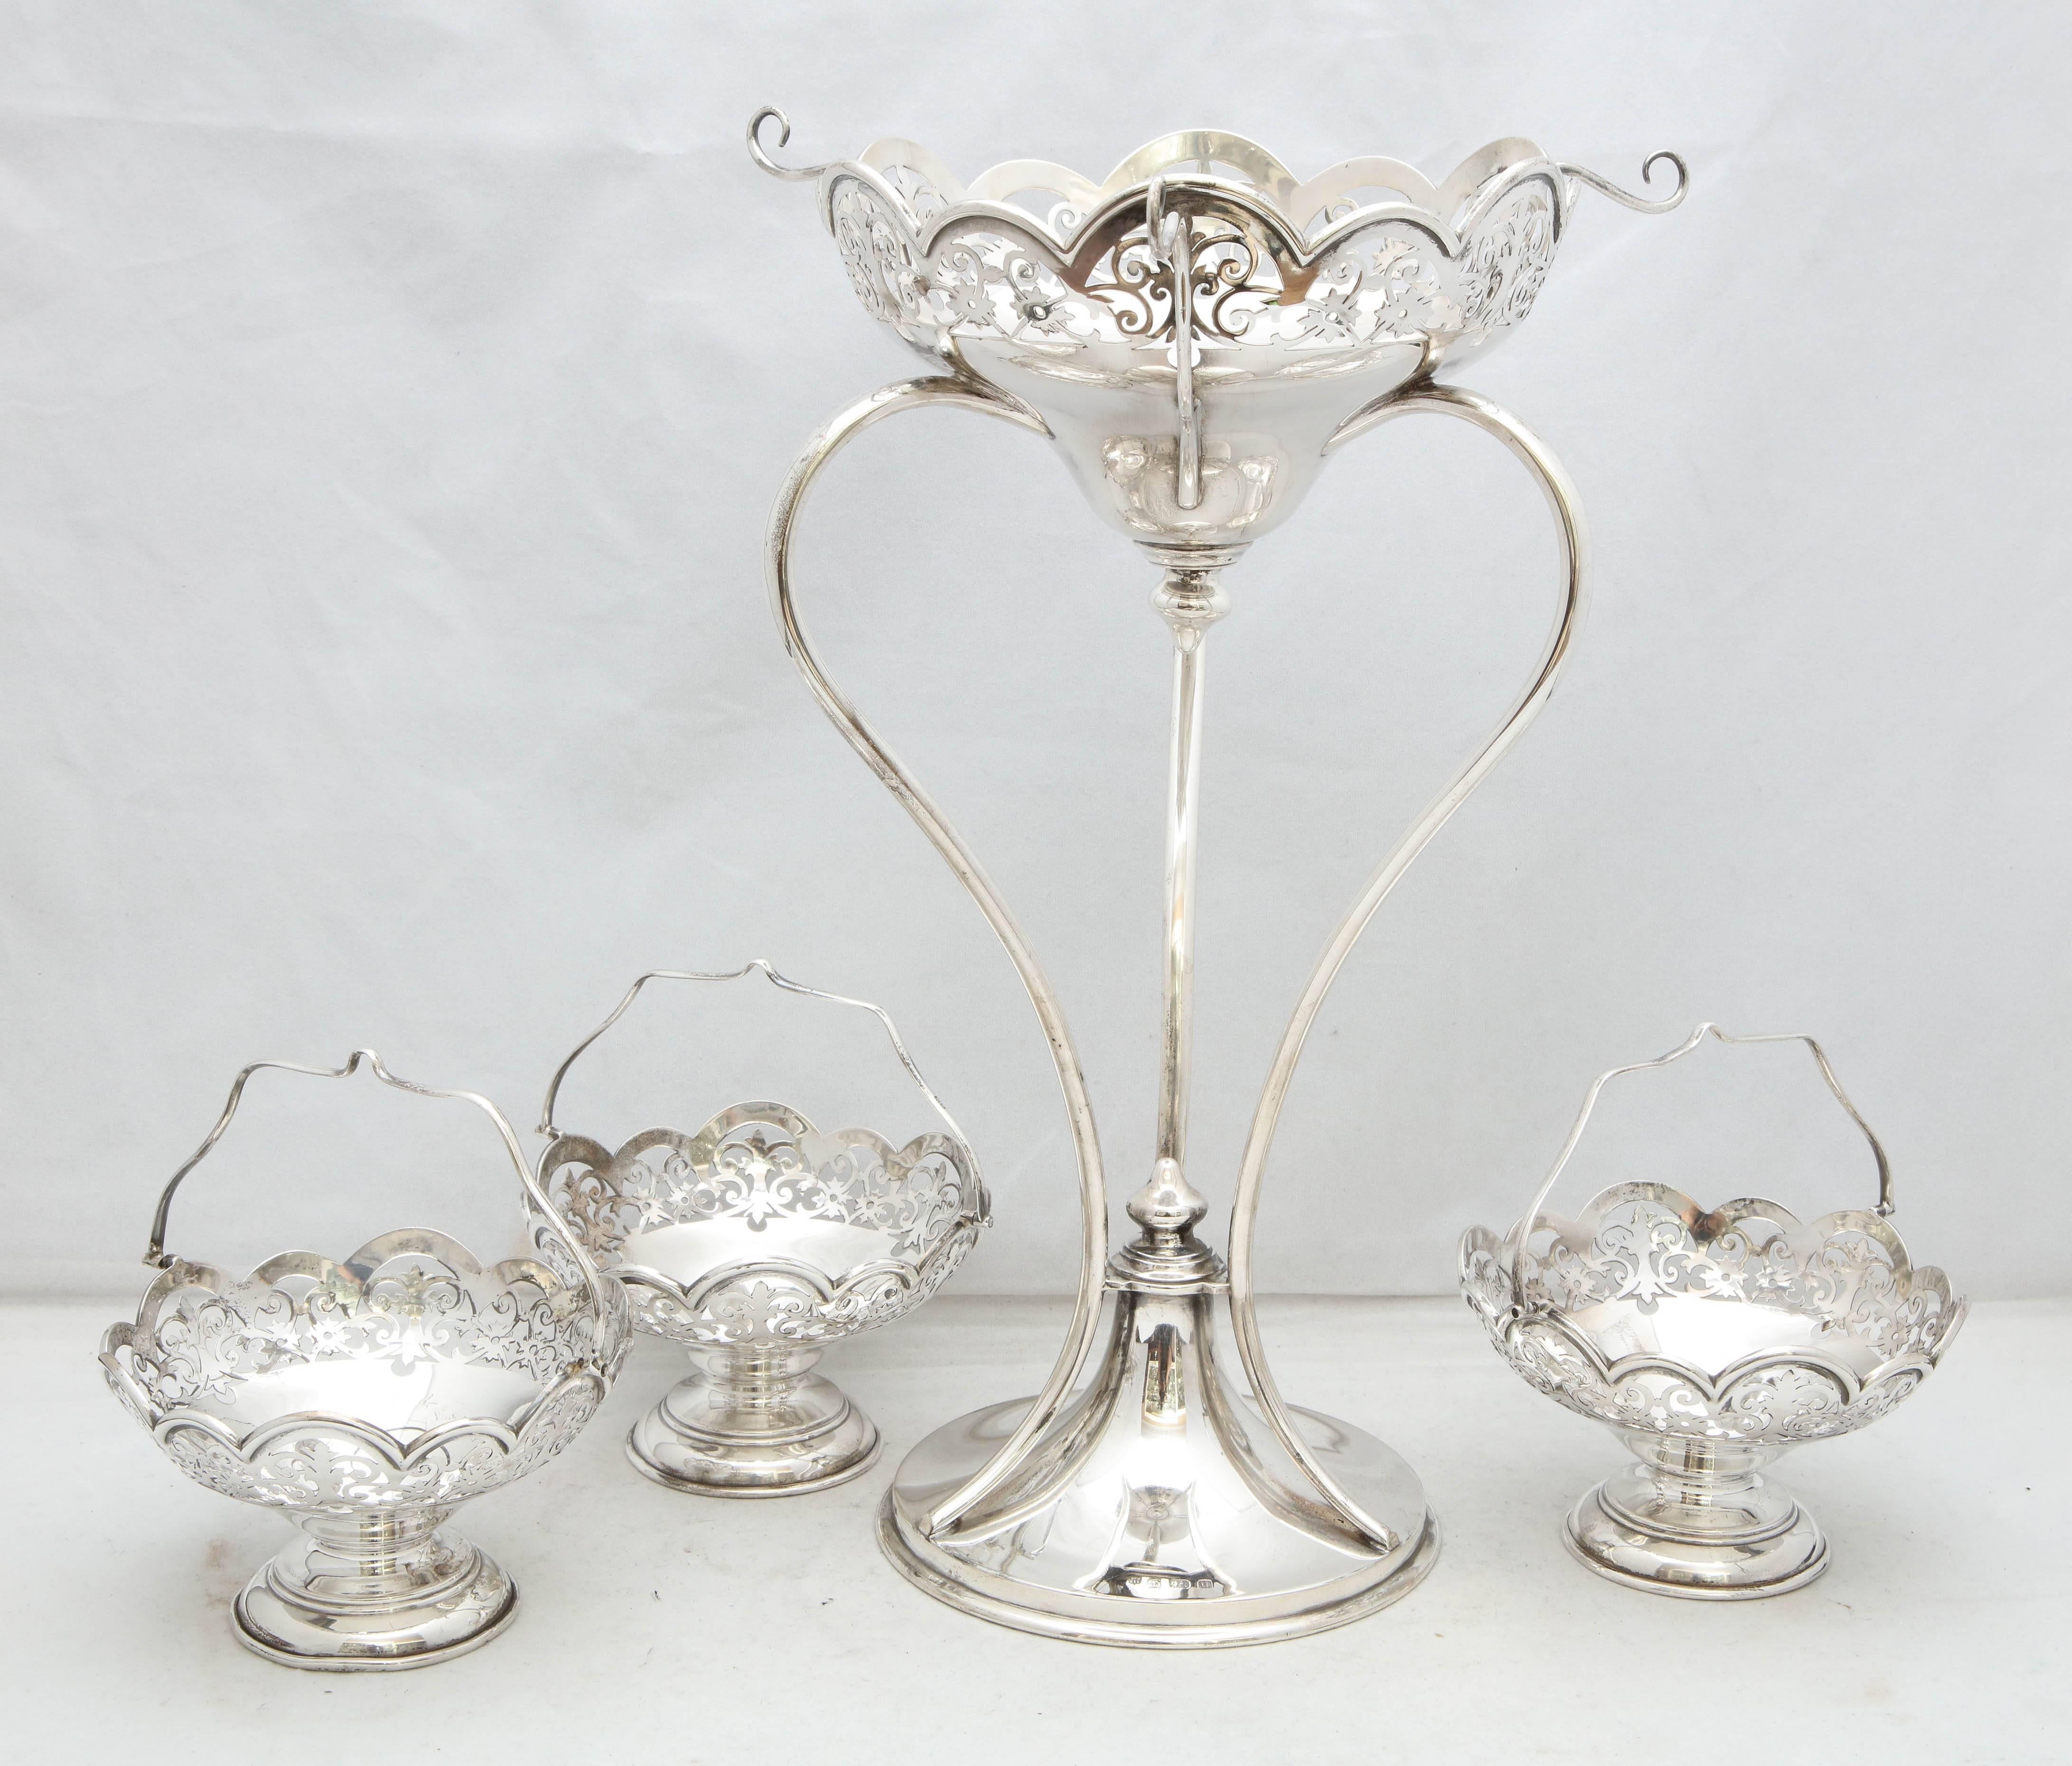 Beautiful Edwardian Style George V Sterling Silver Epergne/Centerpiece For Sale 4